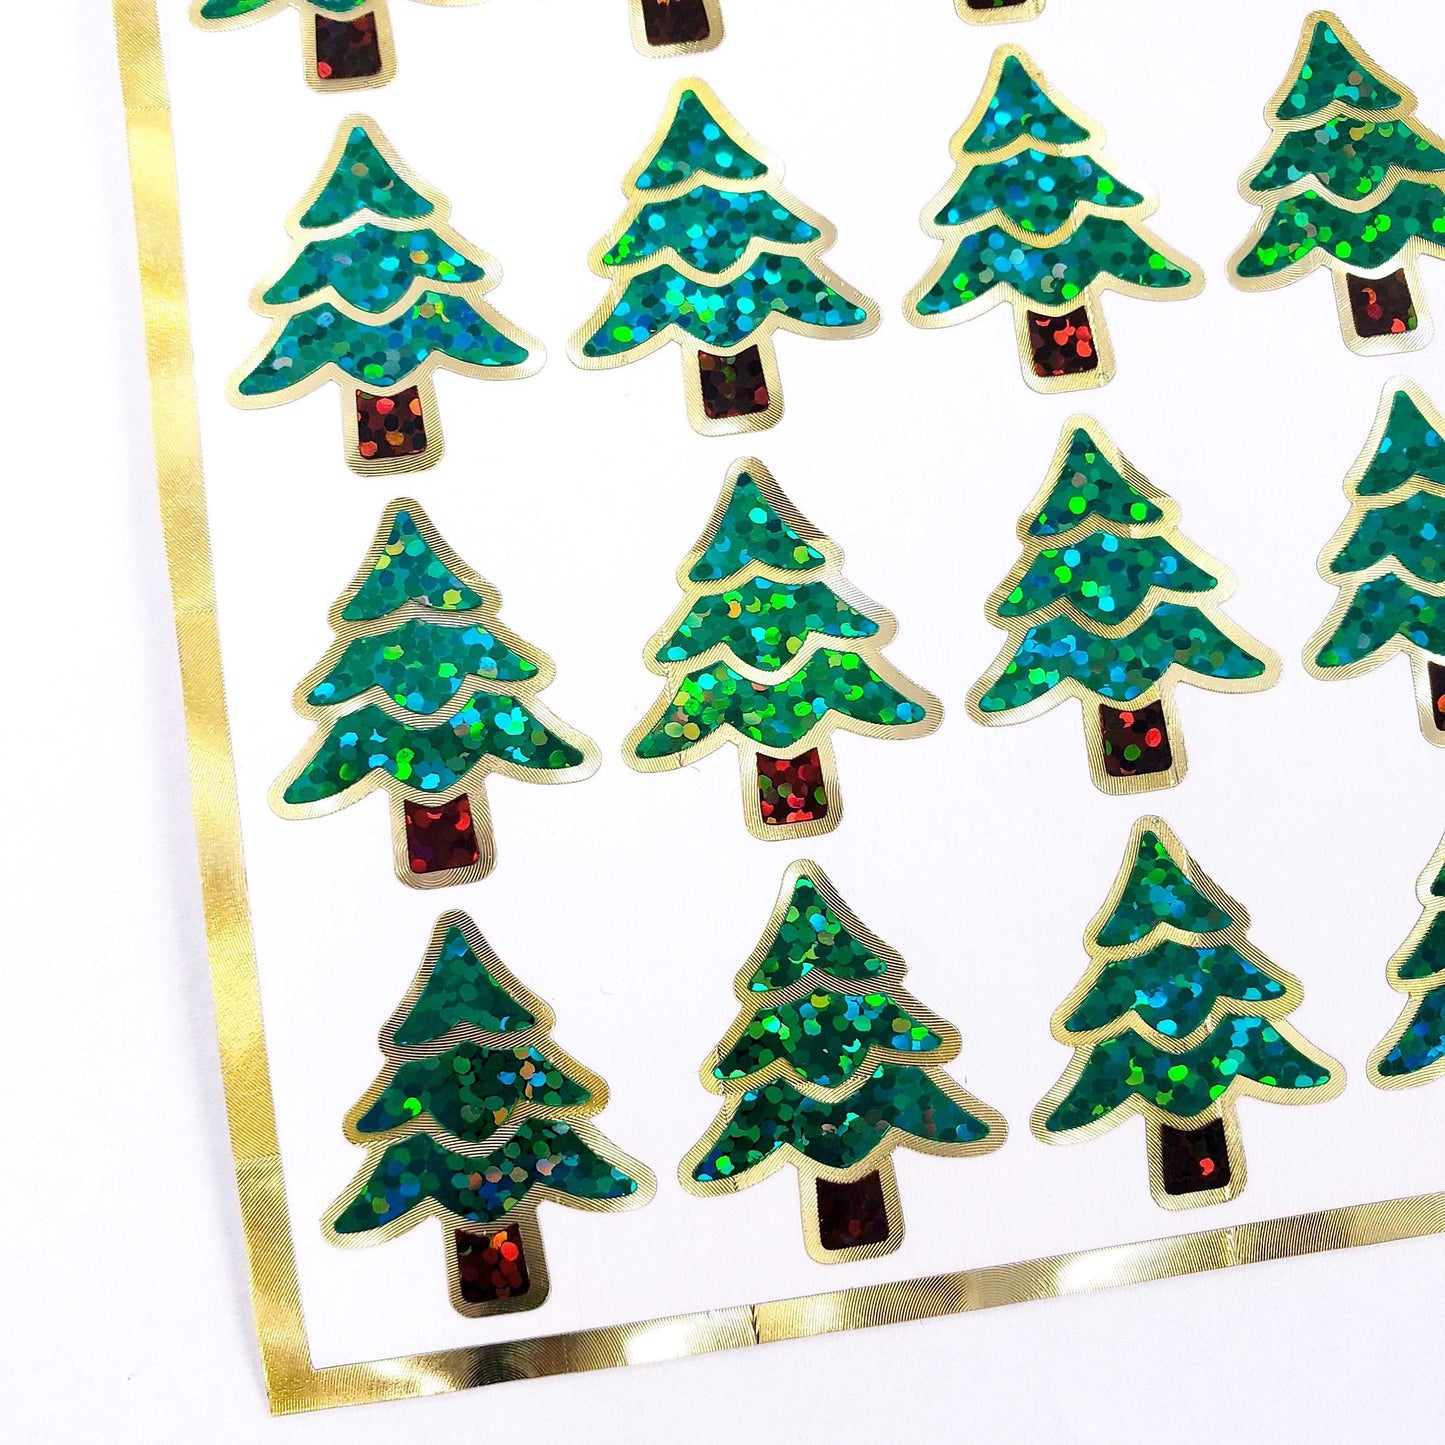 Tree Stickers, set of 30 green, brown and gold woodland pine tree stickers for holiday cards, invitations, envelopes and advent calendars.